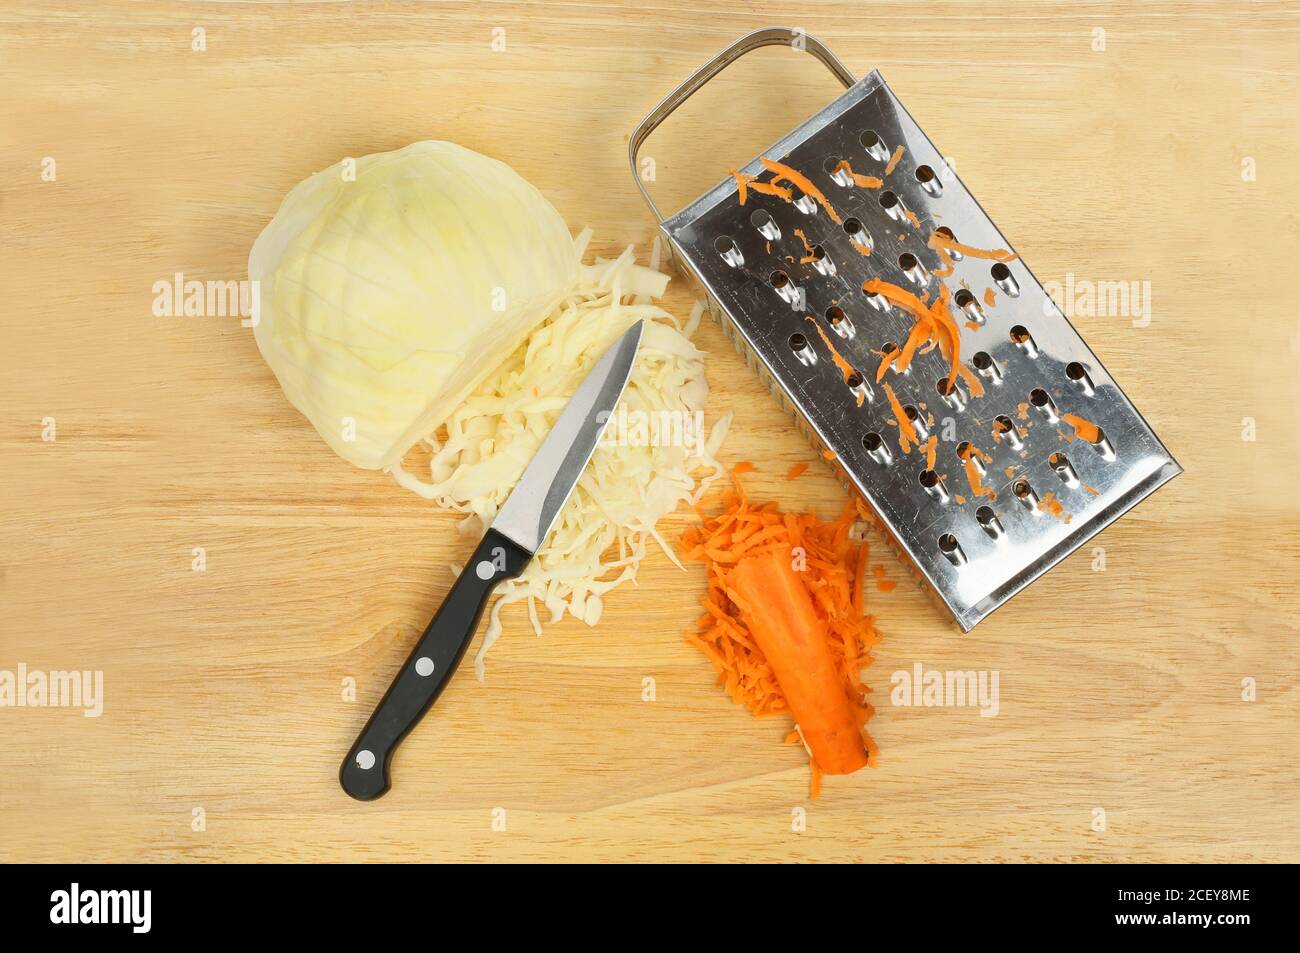 Wooden Korean Carrot, Cabbage, Onion Grater wood Carrot Slicer Vegetable  Chopper Vegetable Graters Carrot Knife Korean Carrot Grater Vegetable  Slicer